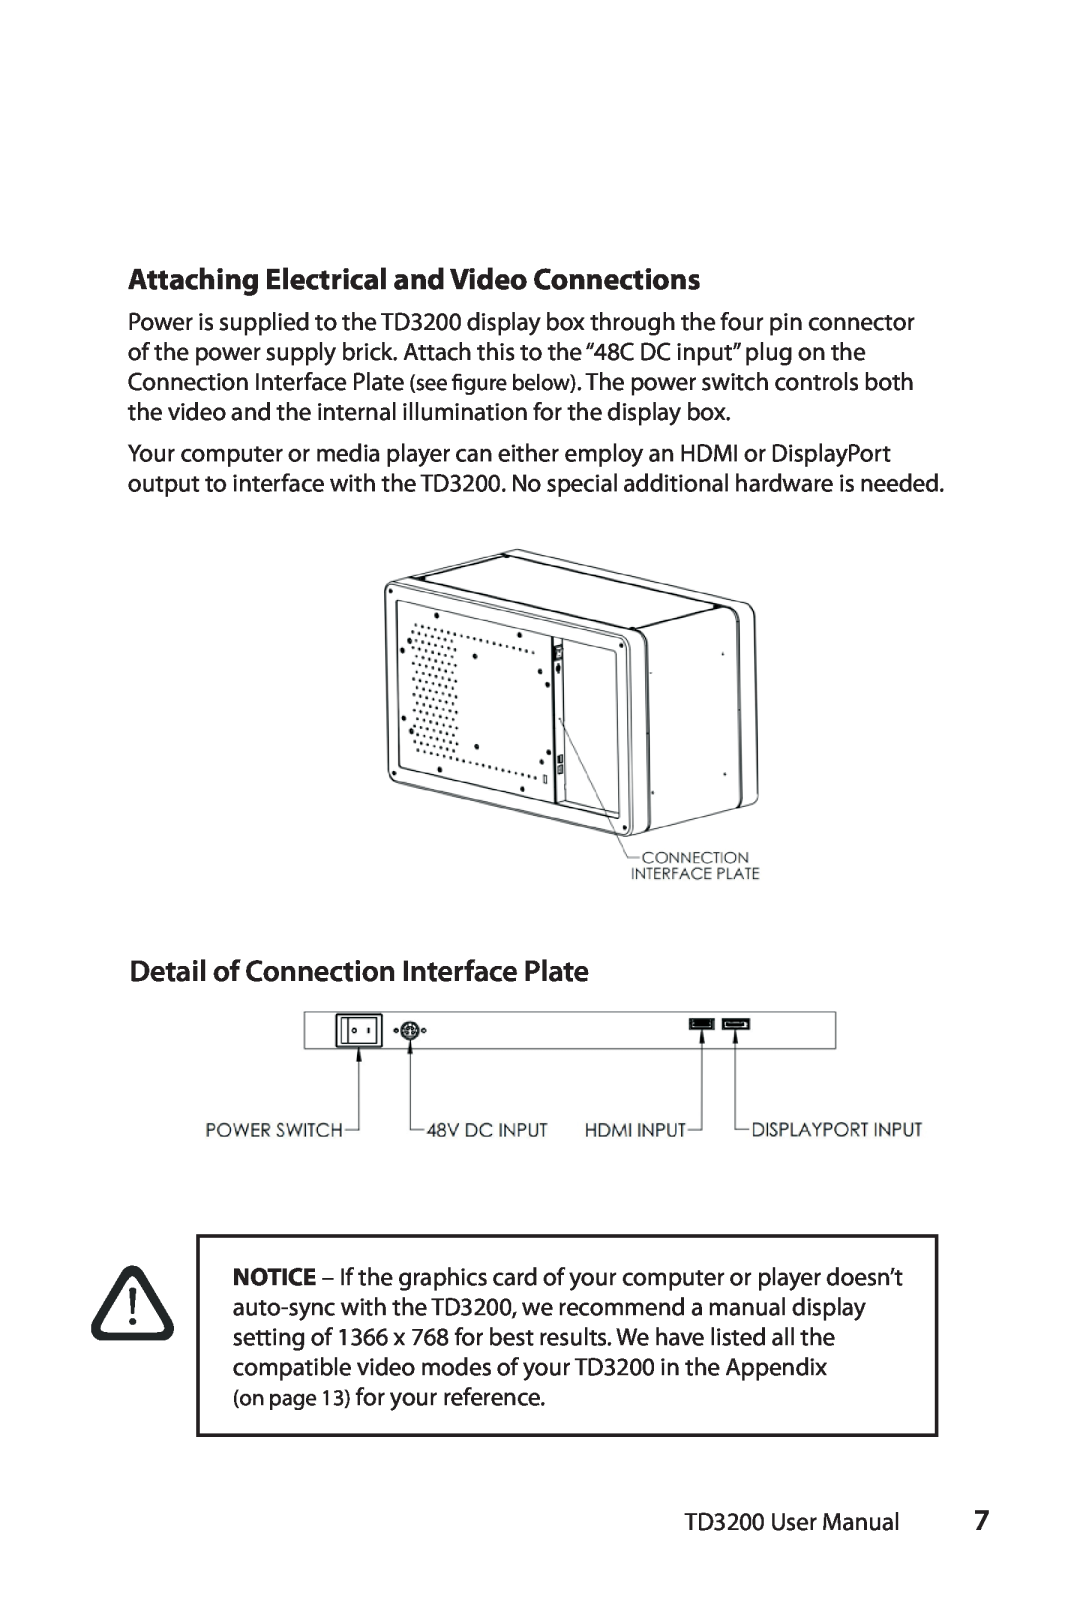 Planar TD3200 user manual Attaching Electrical and Video Connections, Detail of Connection Interface Plate 